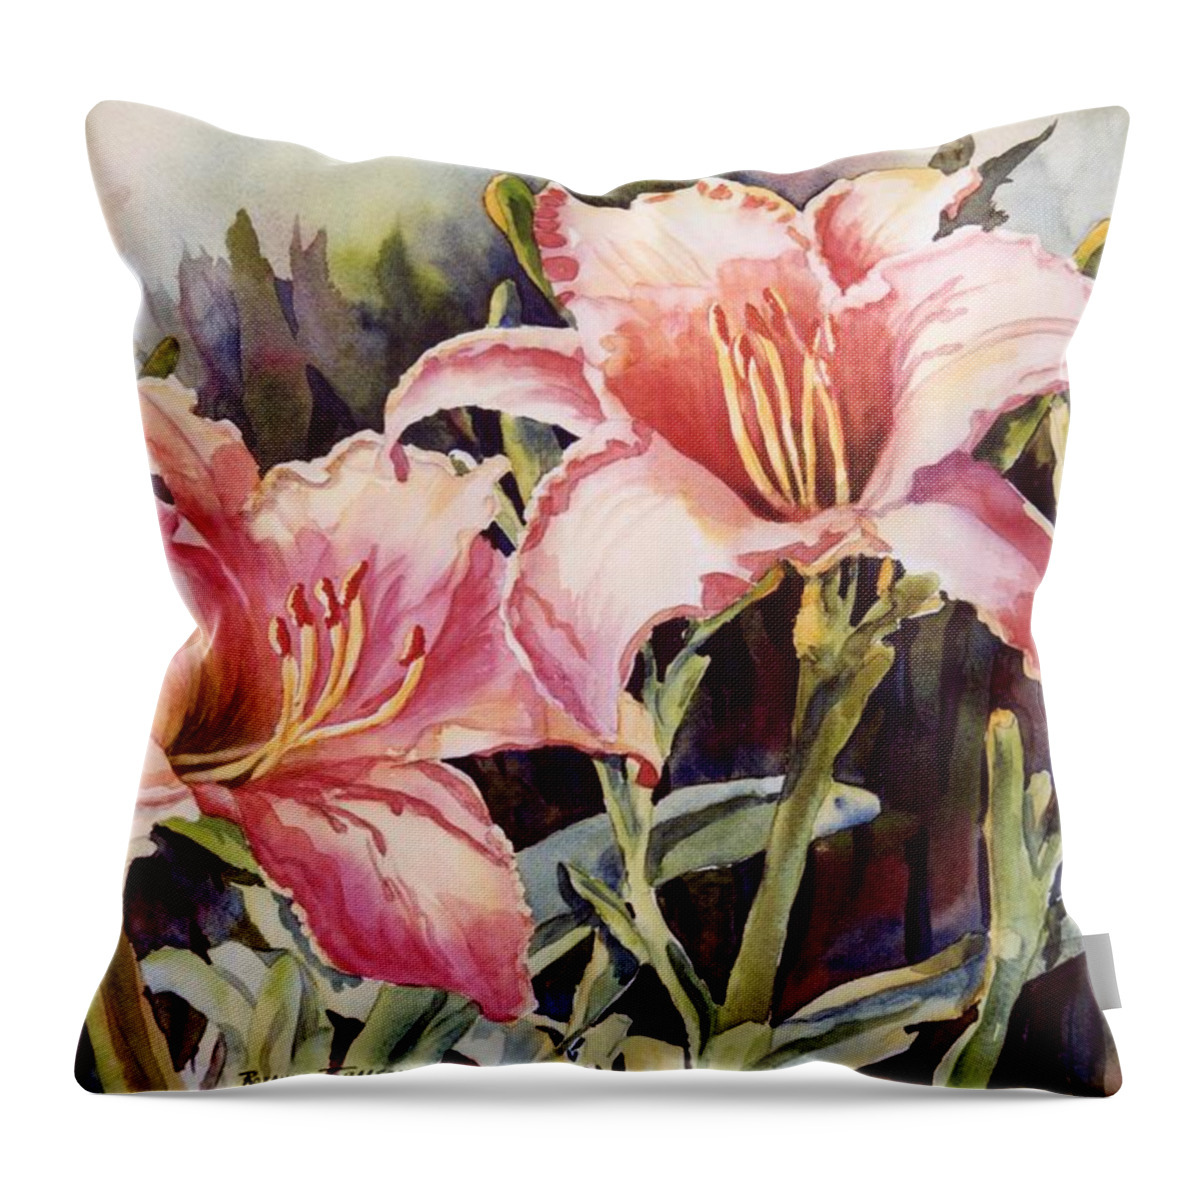 Lillies Throw Pillow featuring the painting Hot Lillies by Roxanne Tobaison